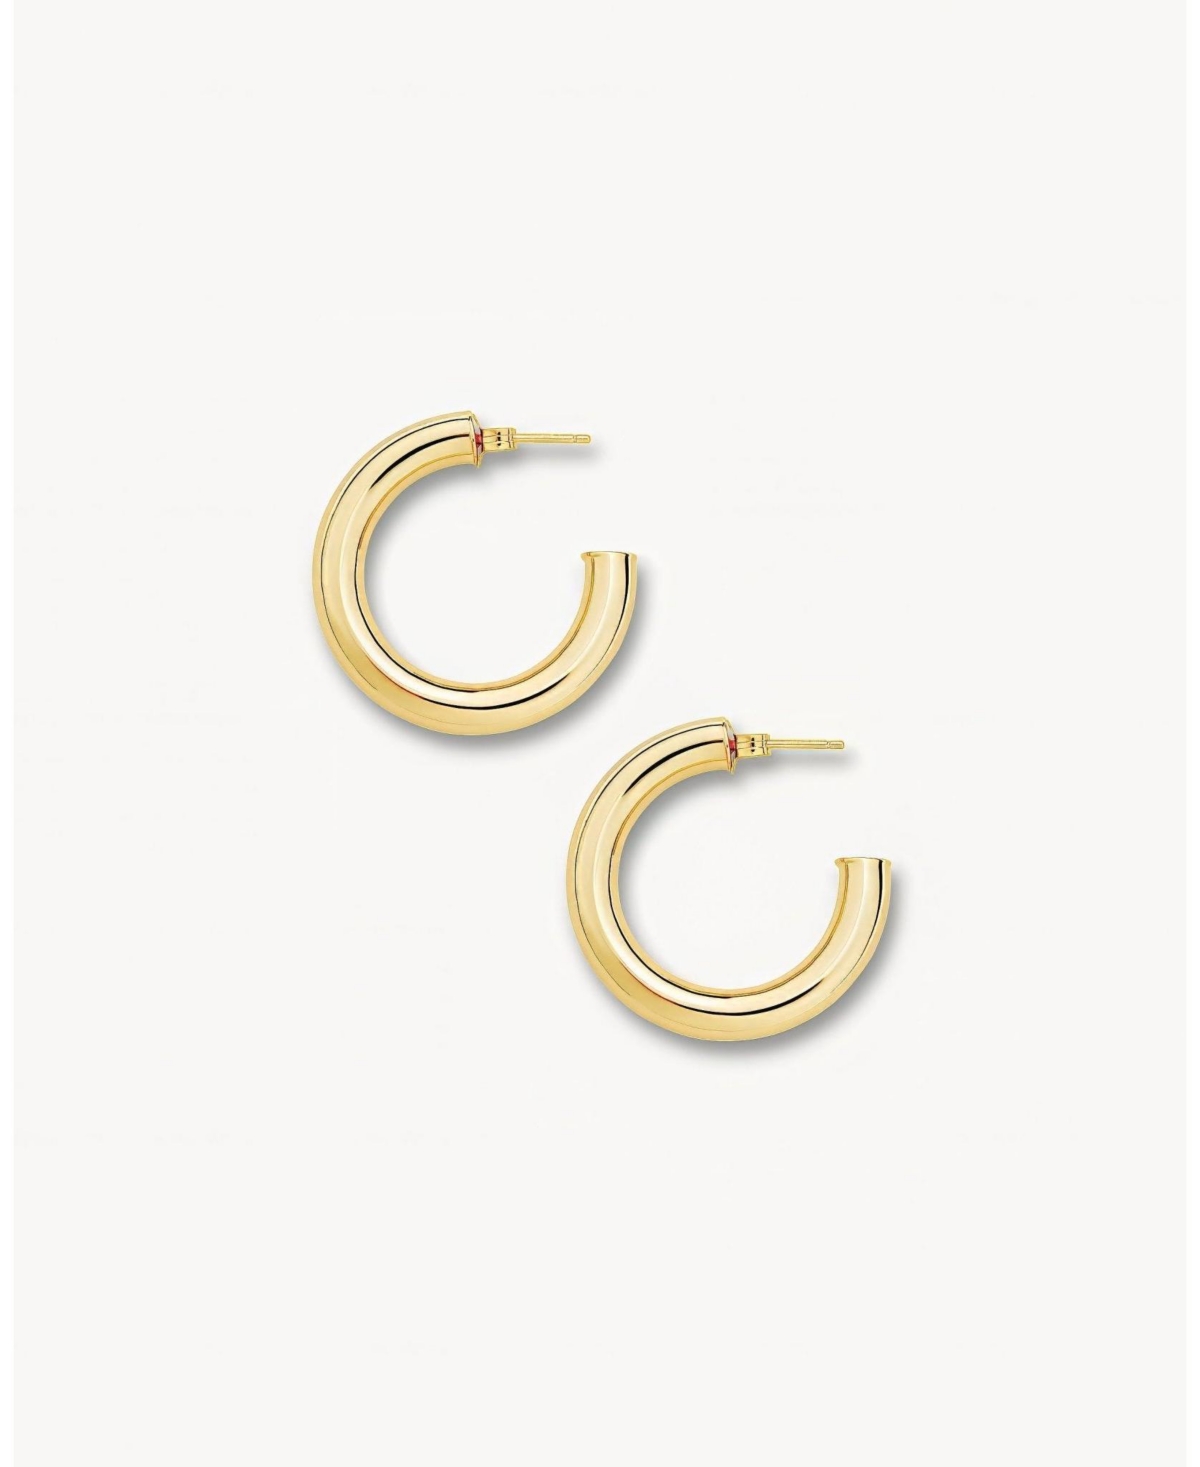 1" Perfect Hoops in Gold - Gold